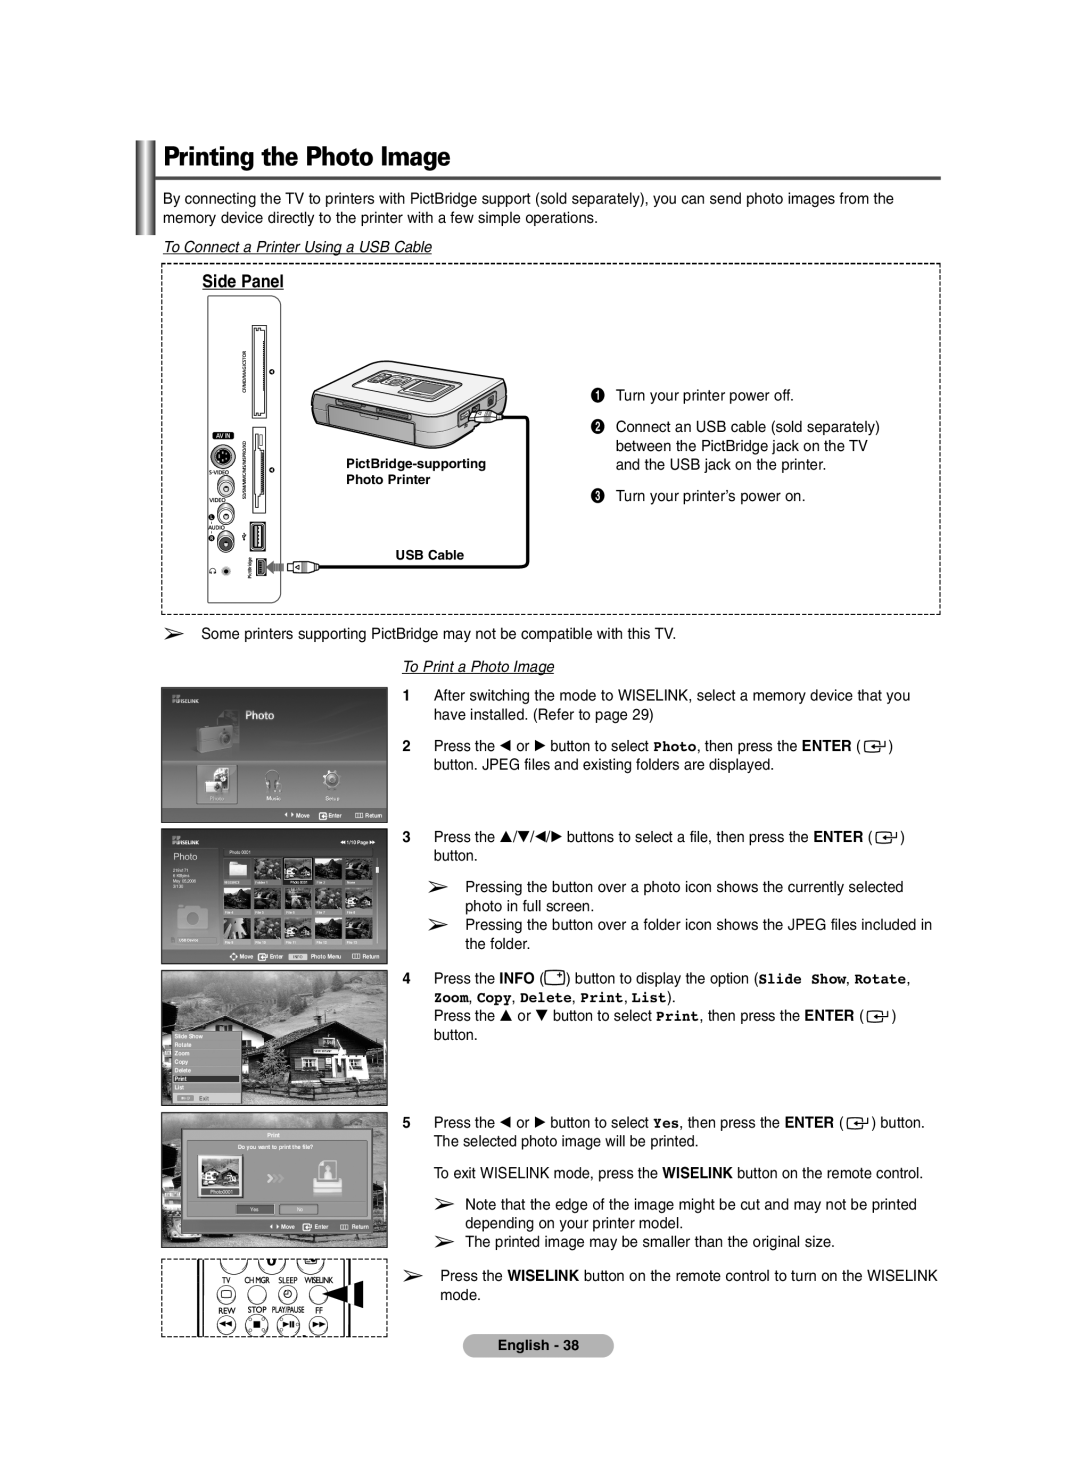 Samsung PDP-TELEVISION manual Printing the Photo Image, To Connect a Printer Using a USB Cable, To Print a Photo Image 